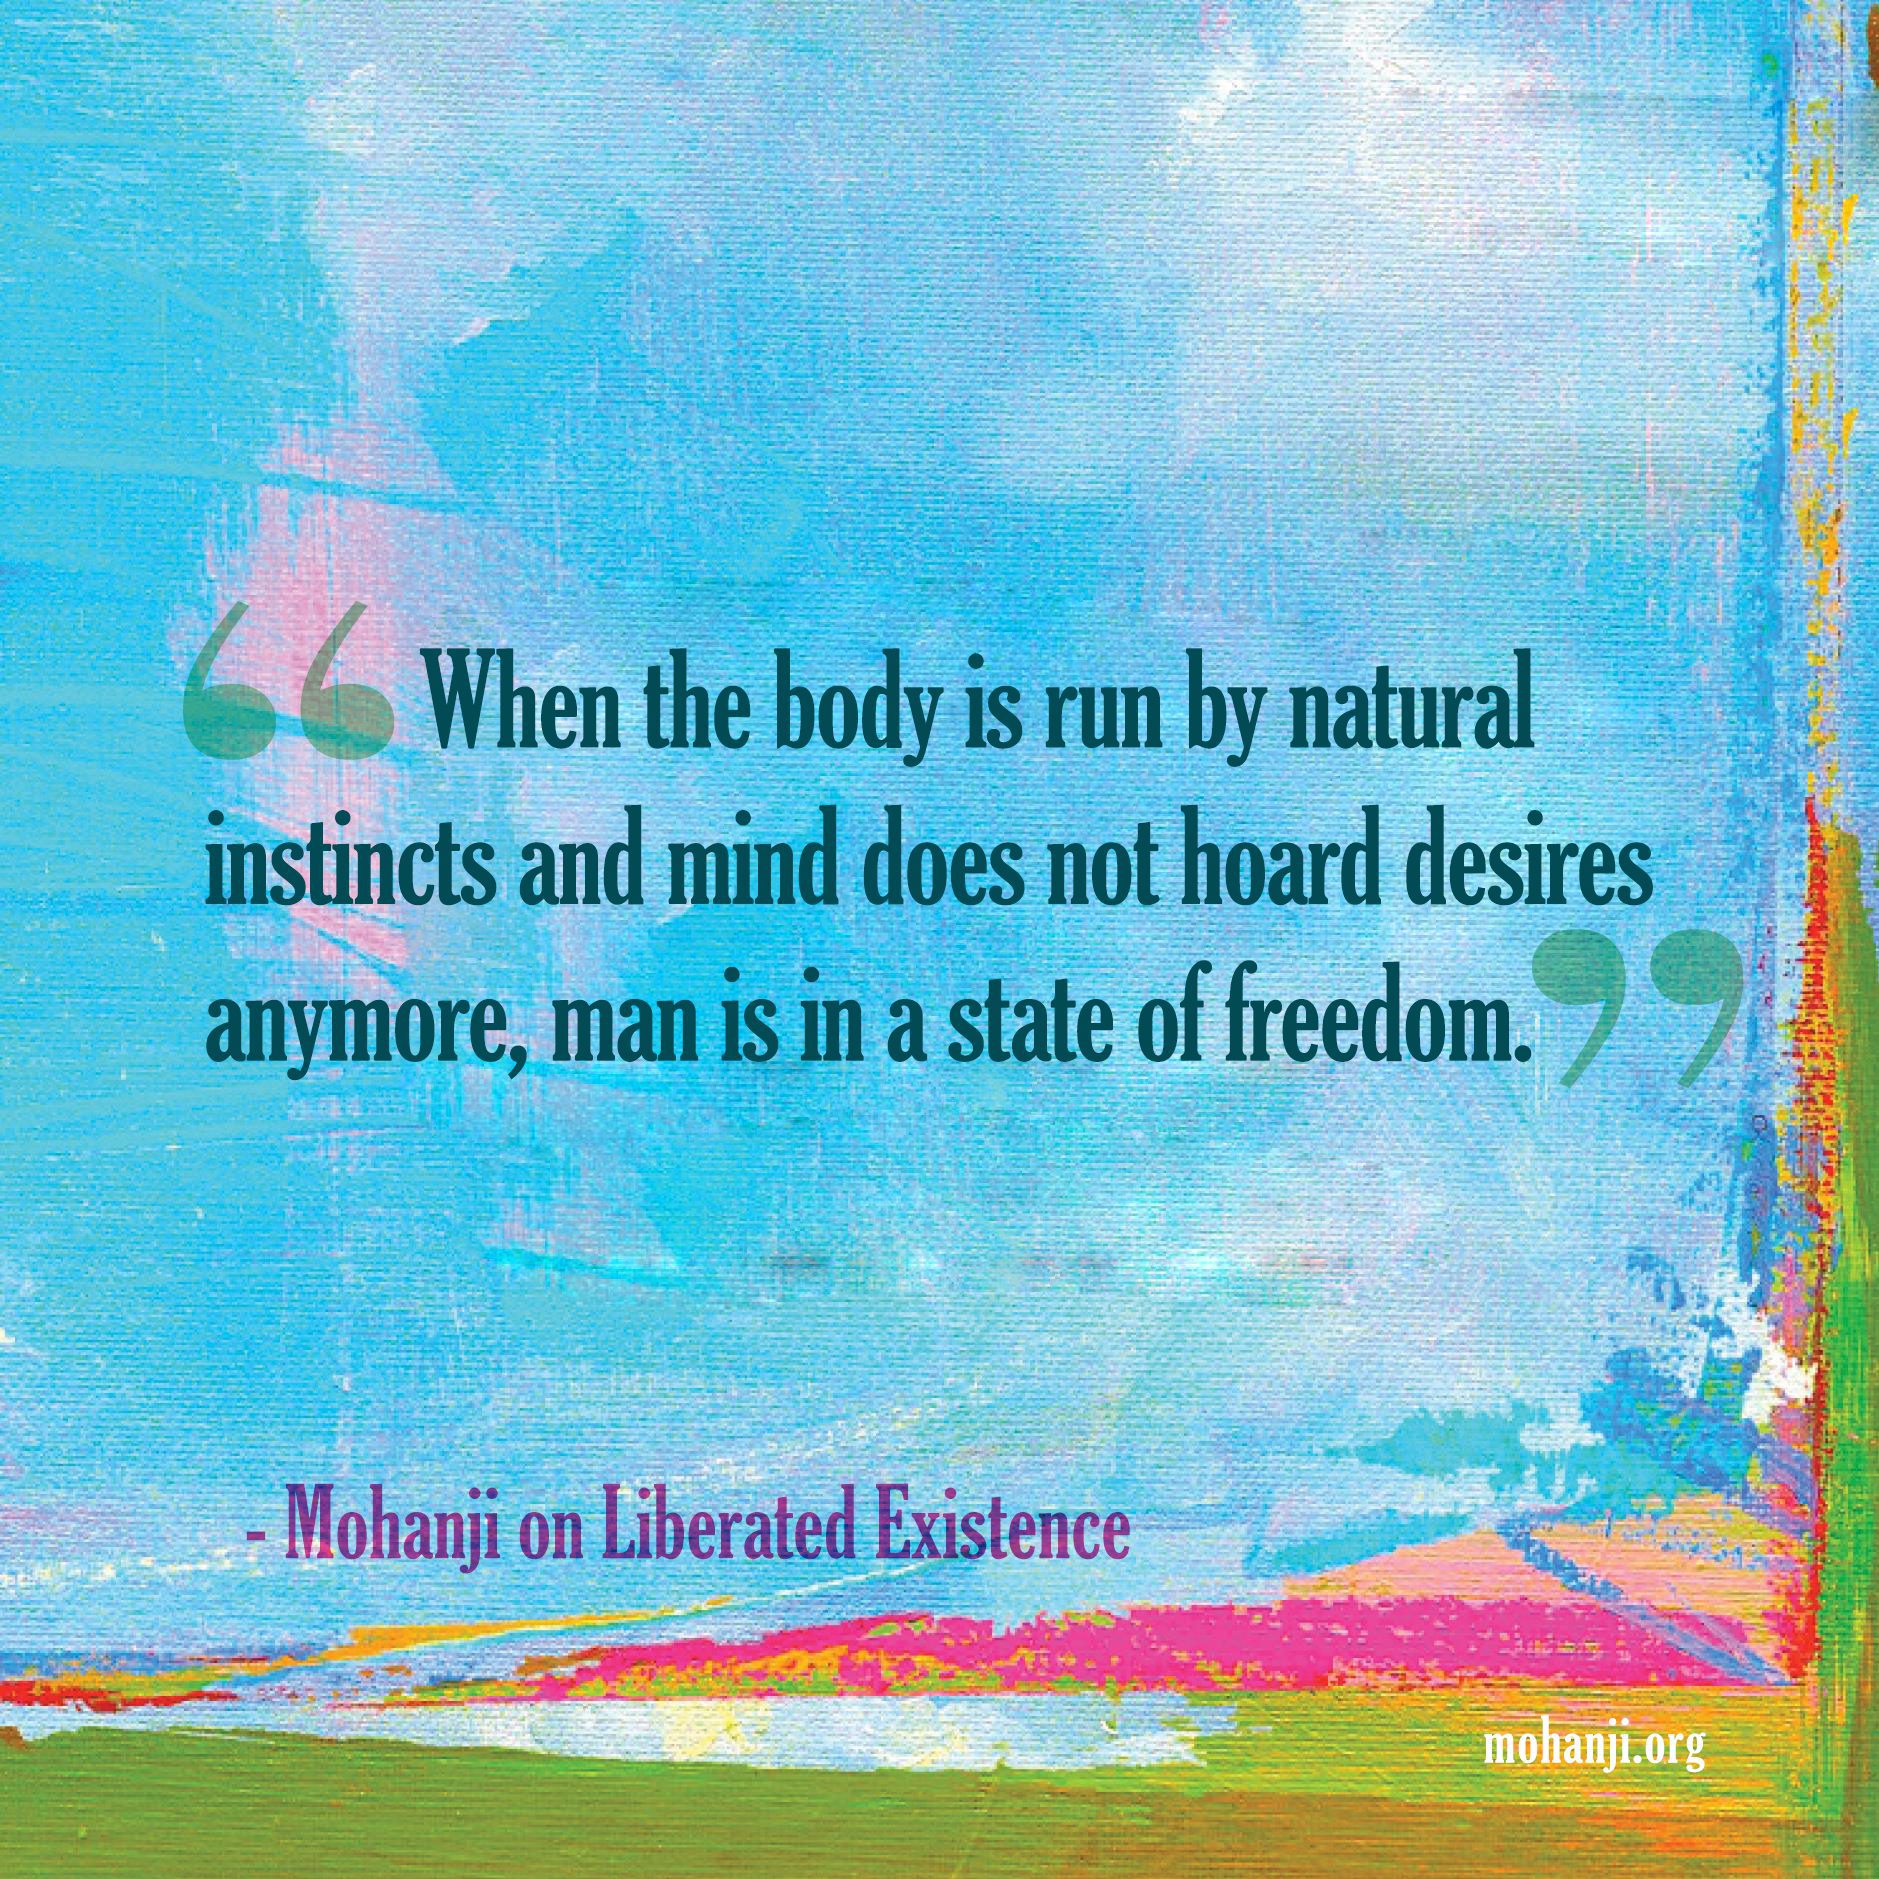 Mohanji quote - Liberated existence 2